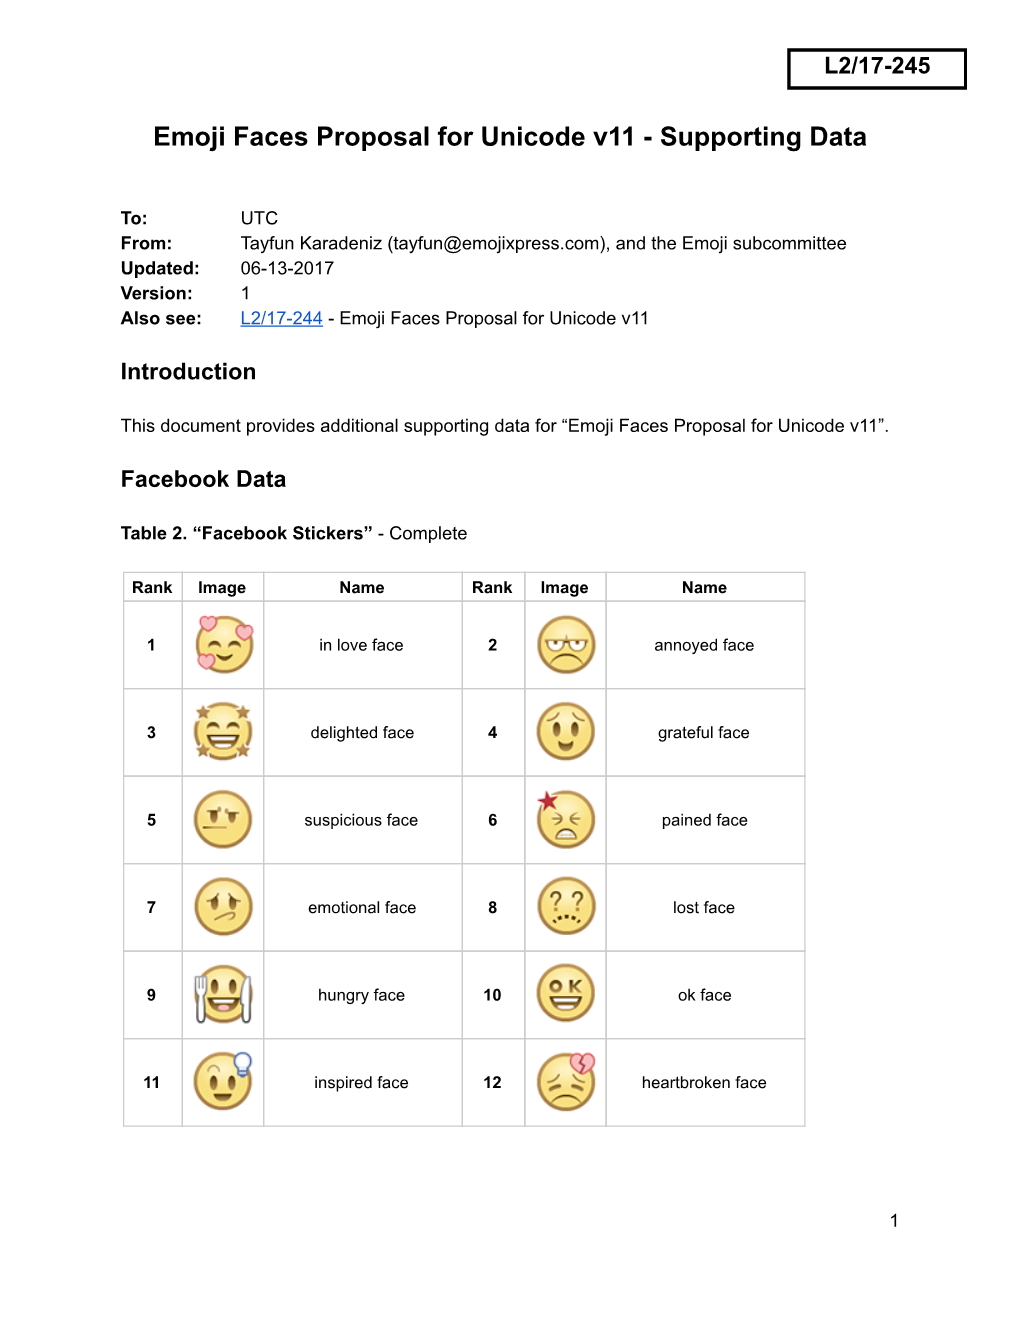 Emoji Faces Proposal for Unicode V11 Supporting Data